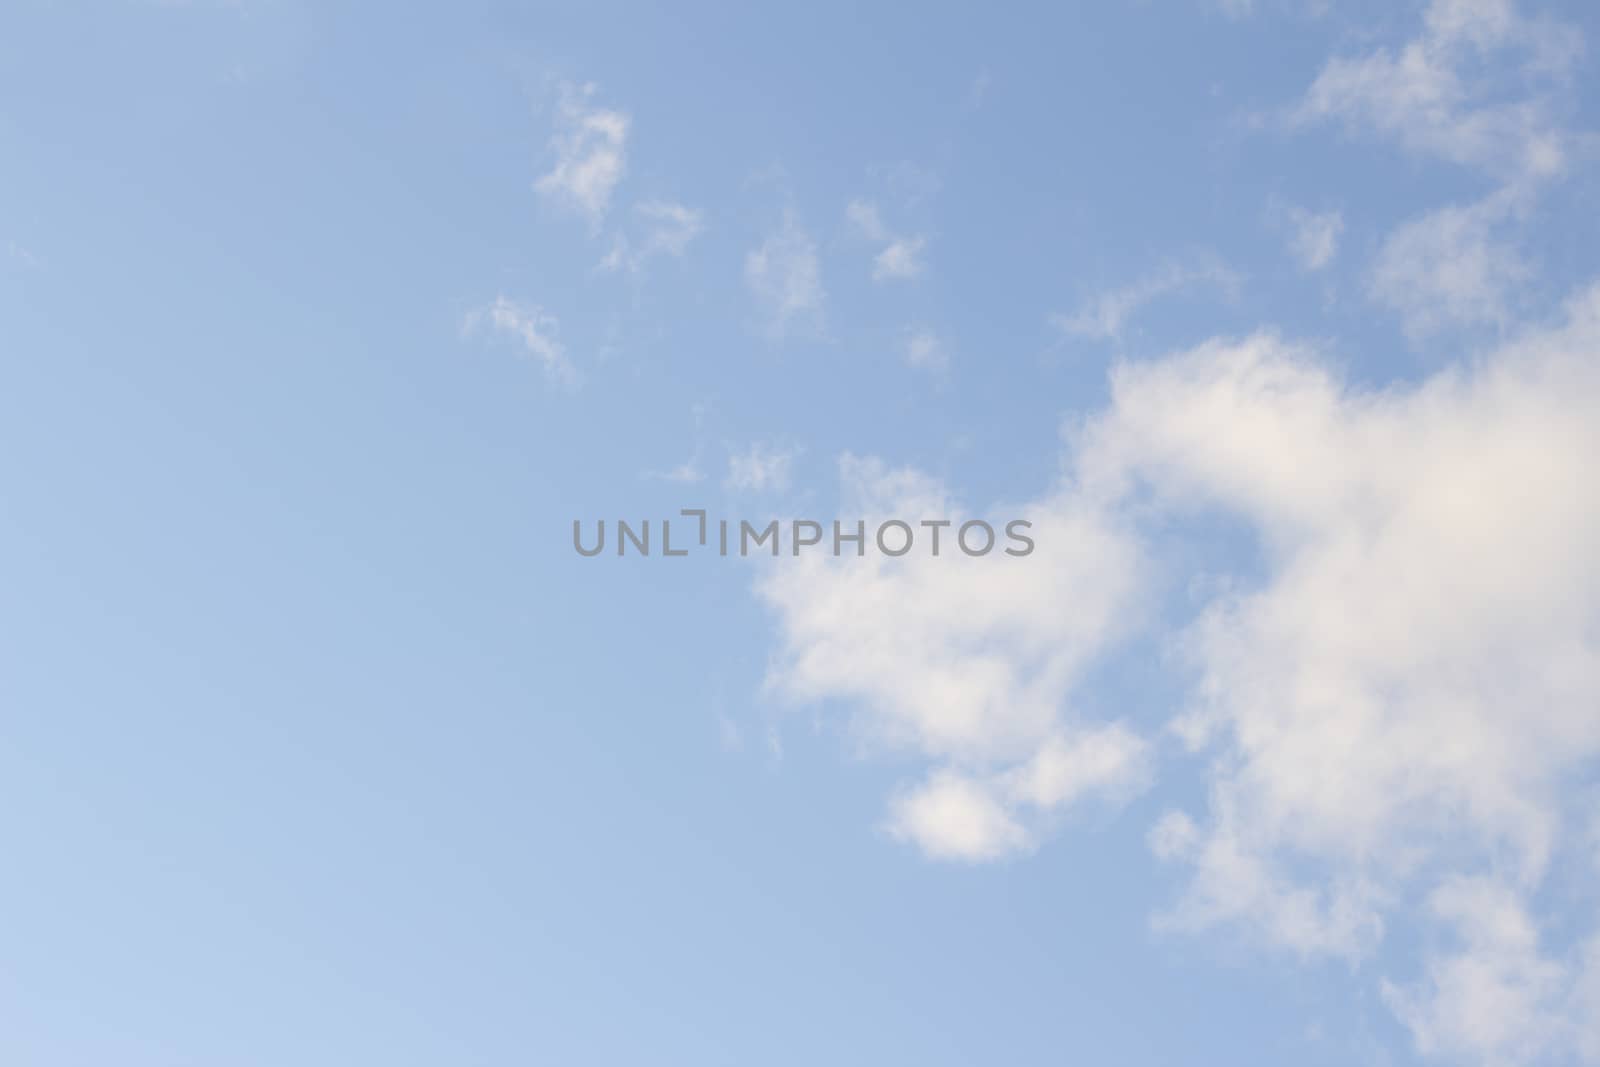 Blue bright summer sky with soft light white clouds on sunny warm day in Madrid Spain horizontal rectangular photo.